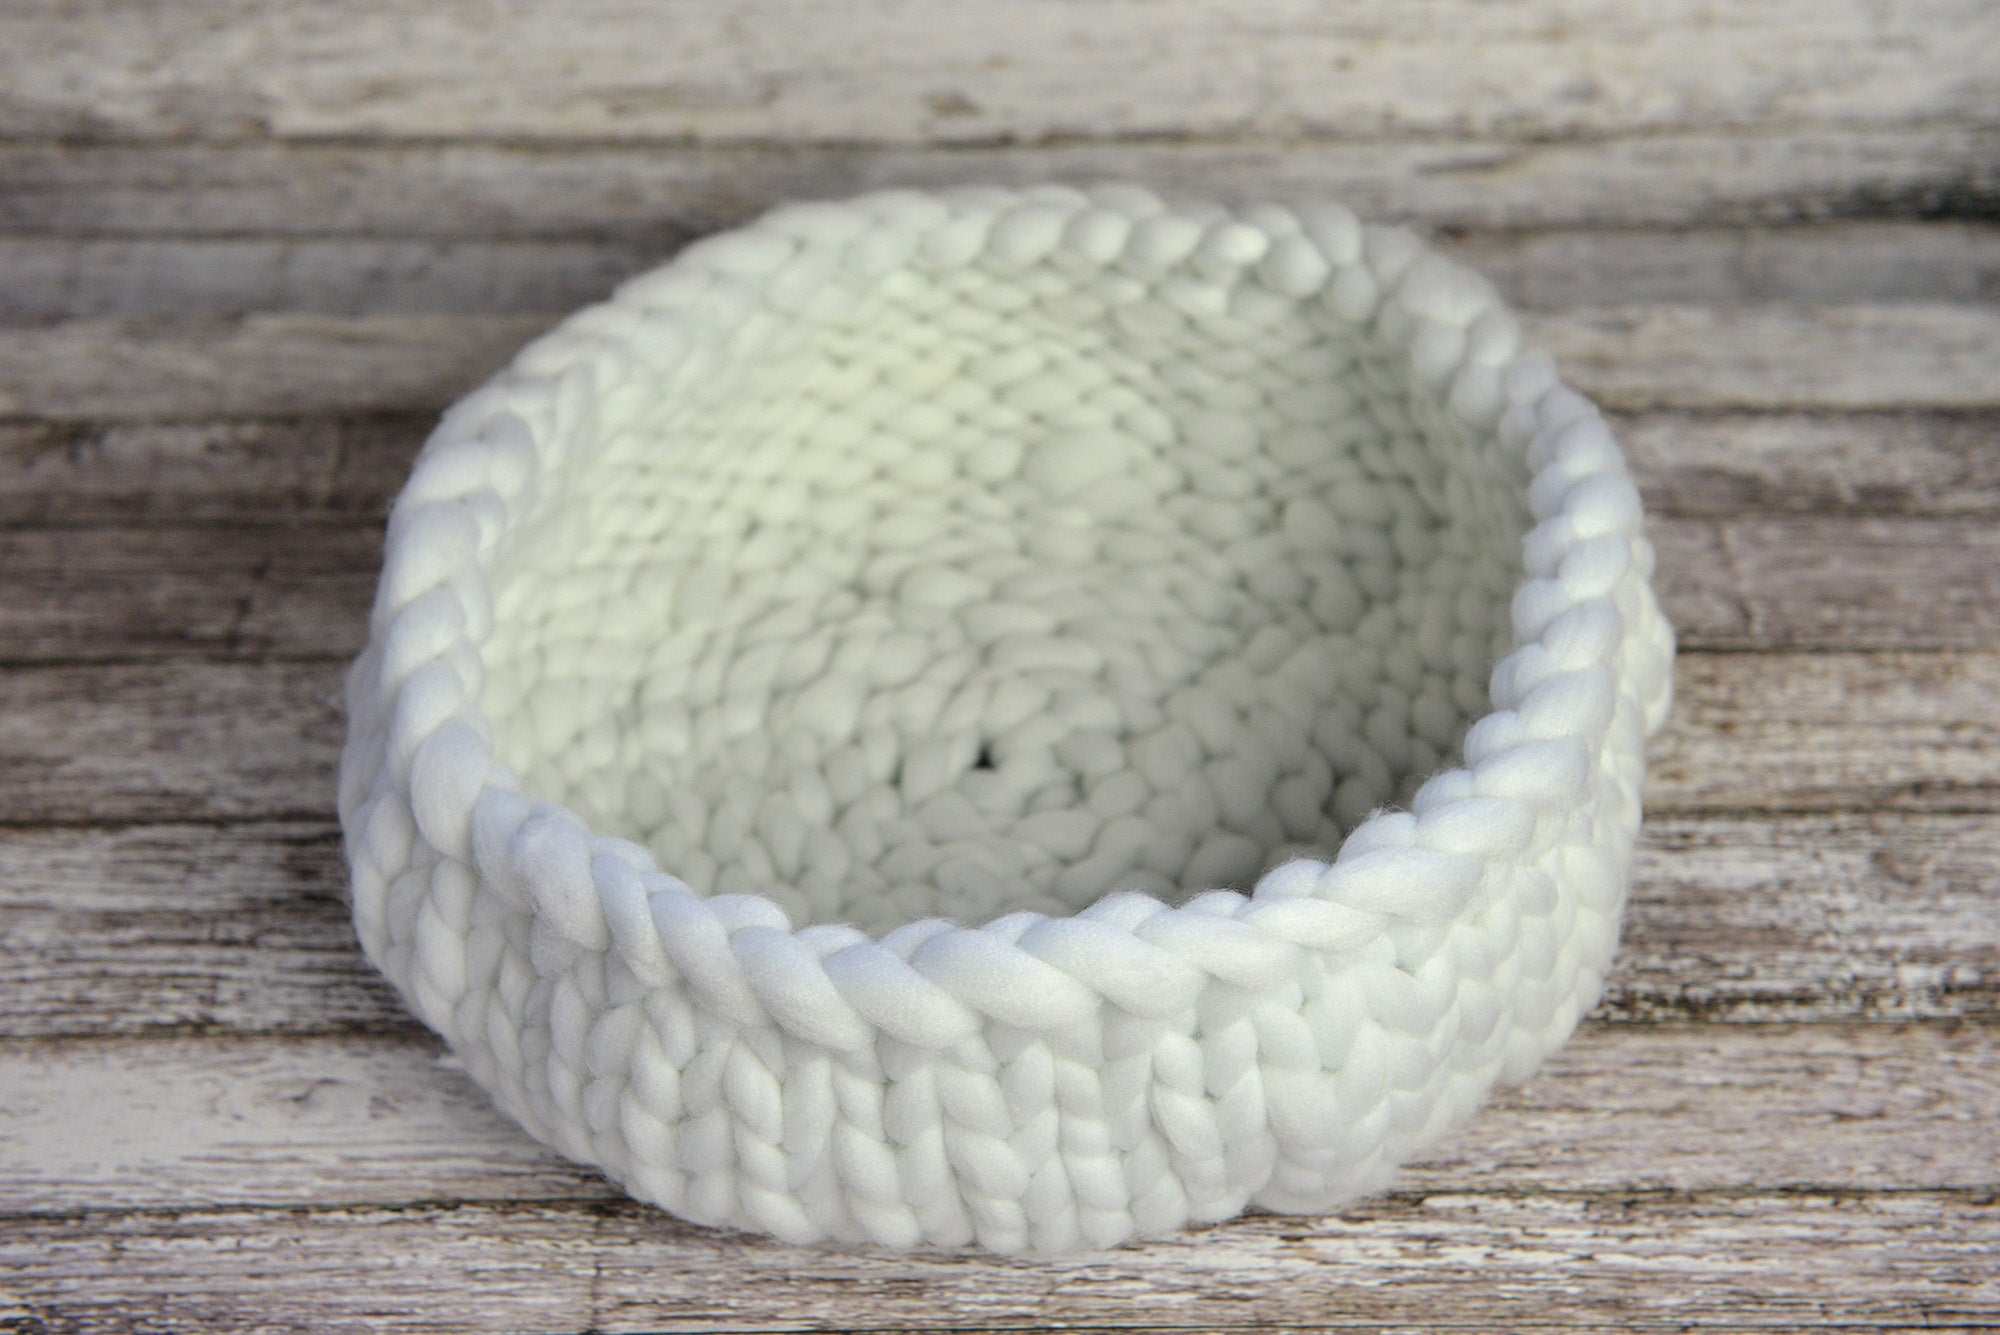 Knitted Thick Yarn Basket - White